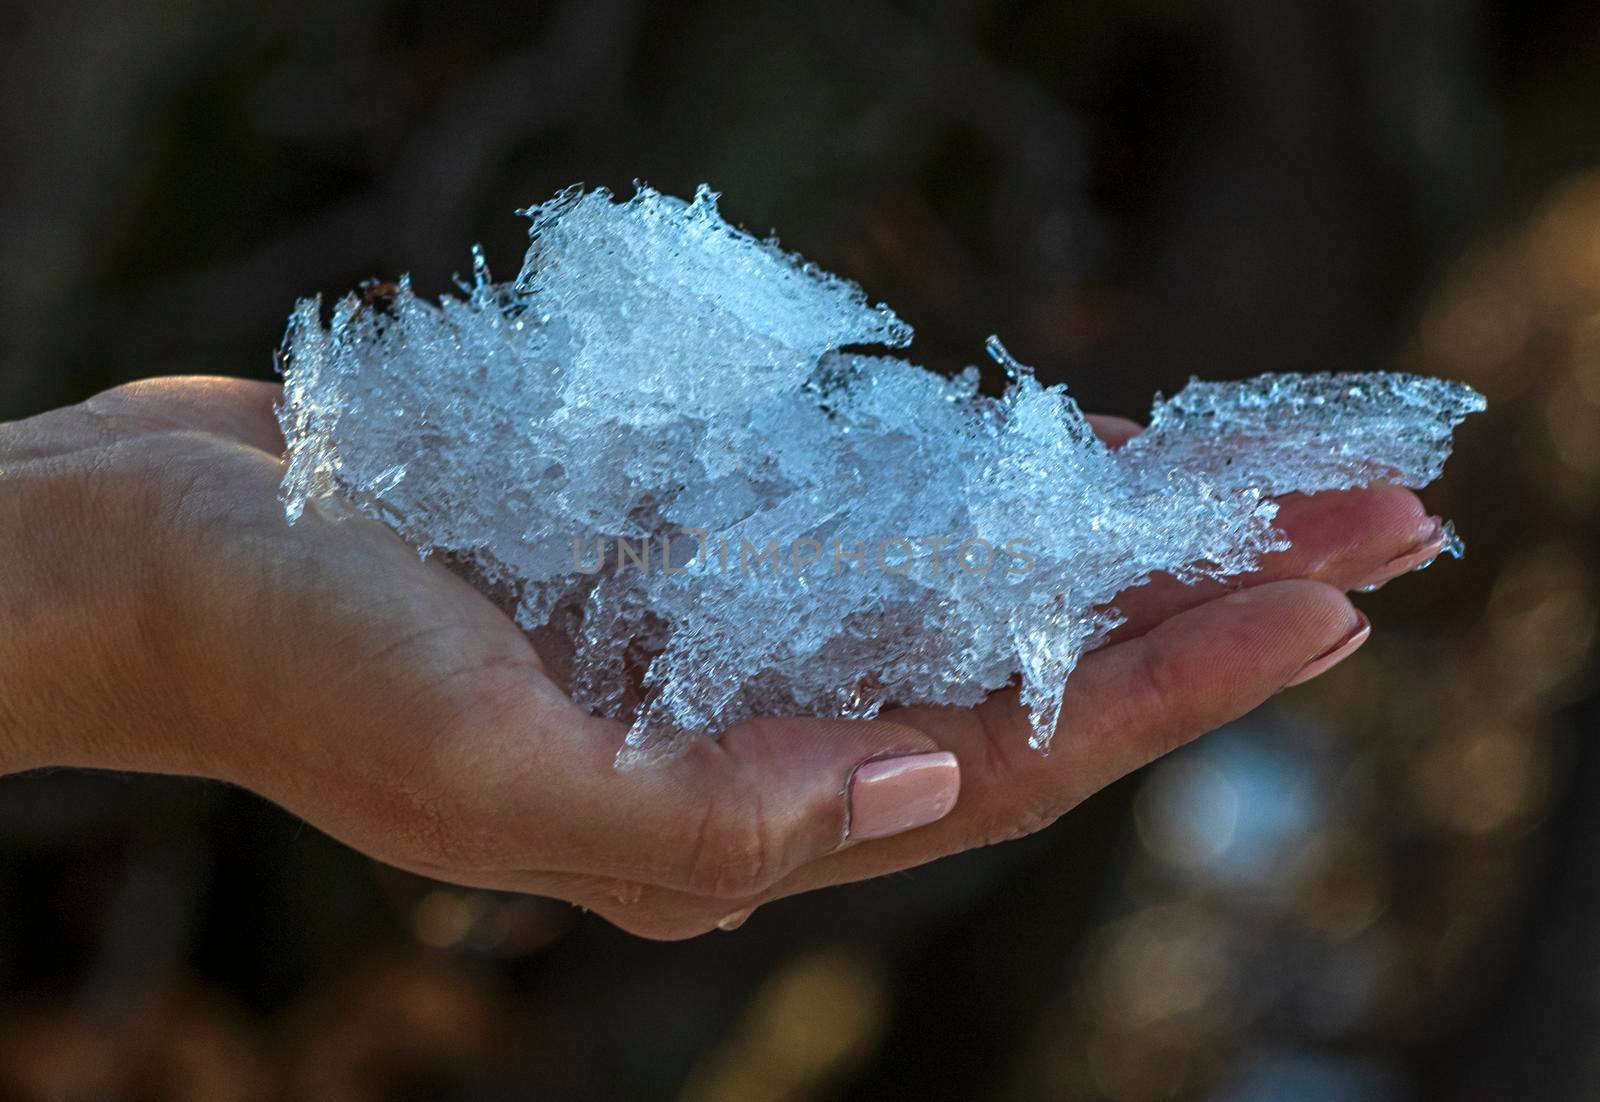 A hand full of ice on a blurred background by bybyphotography